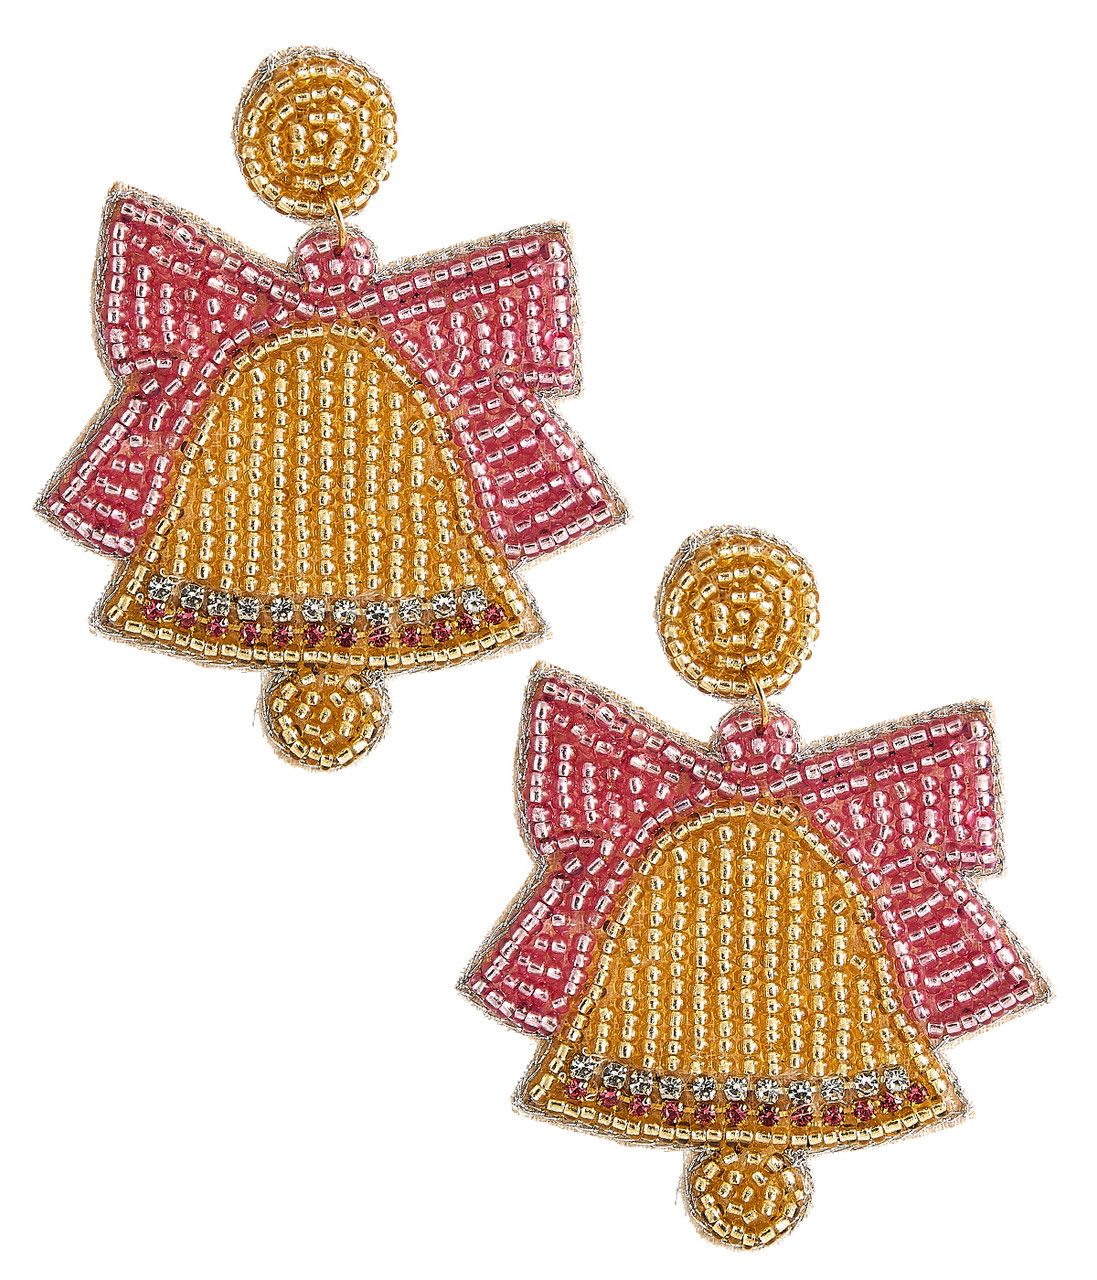 The Carol - Fabric Earring - Amy Littleson Collection | Lisi Lerch Inc